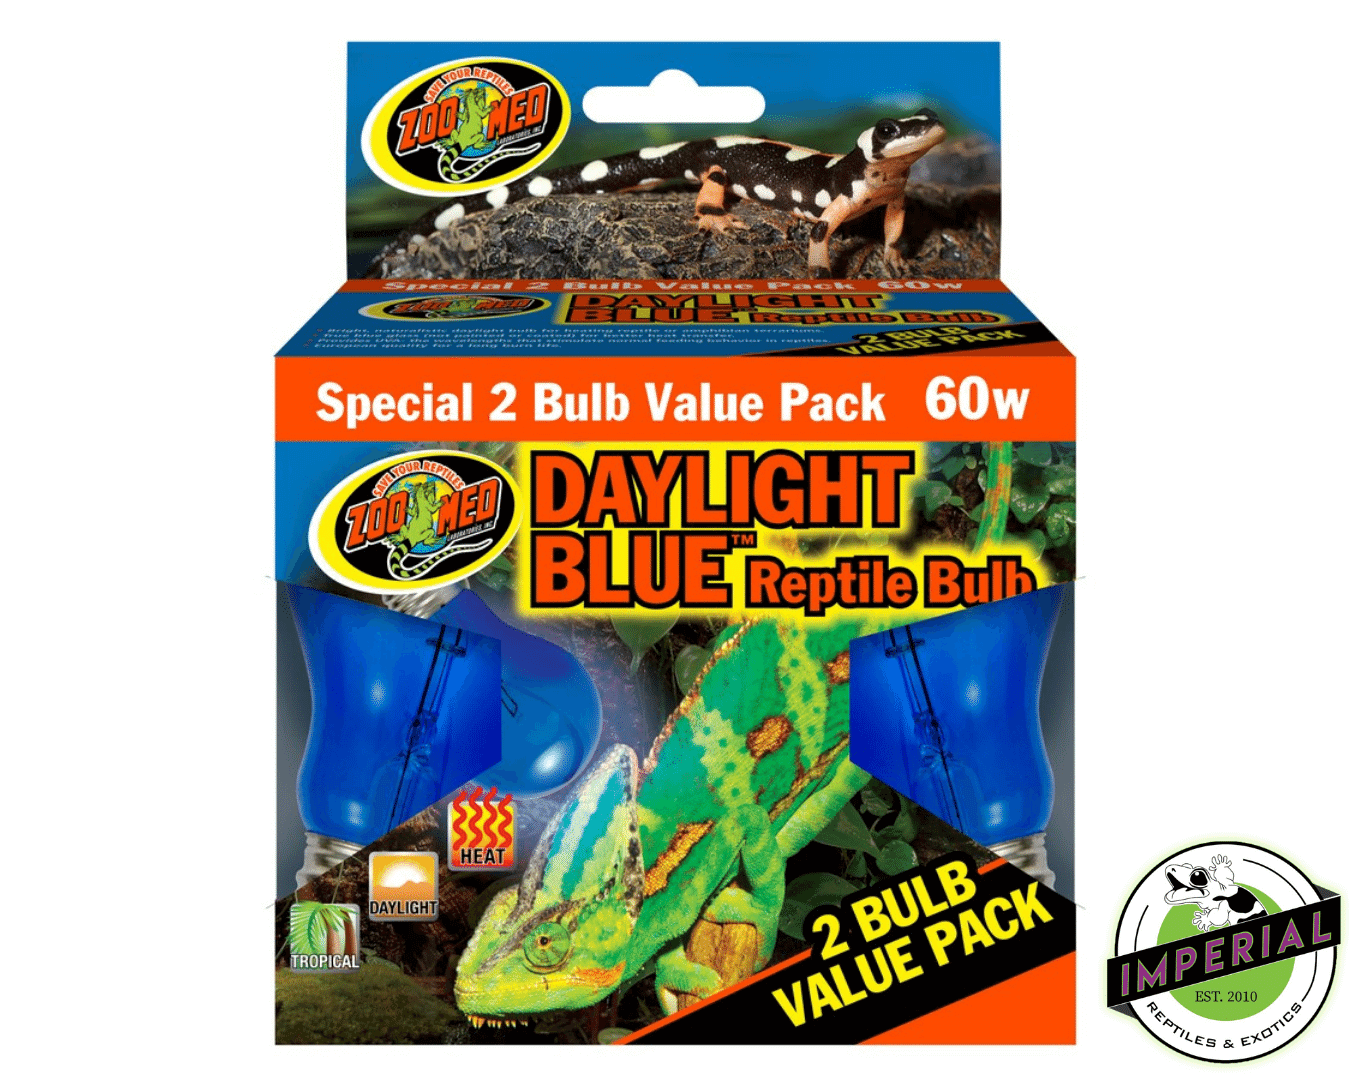 daylight reptile bulb for sale online, buy cheap reptile supplies near me